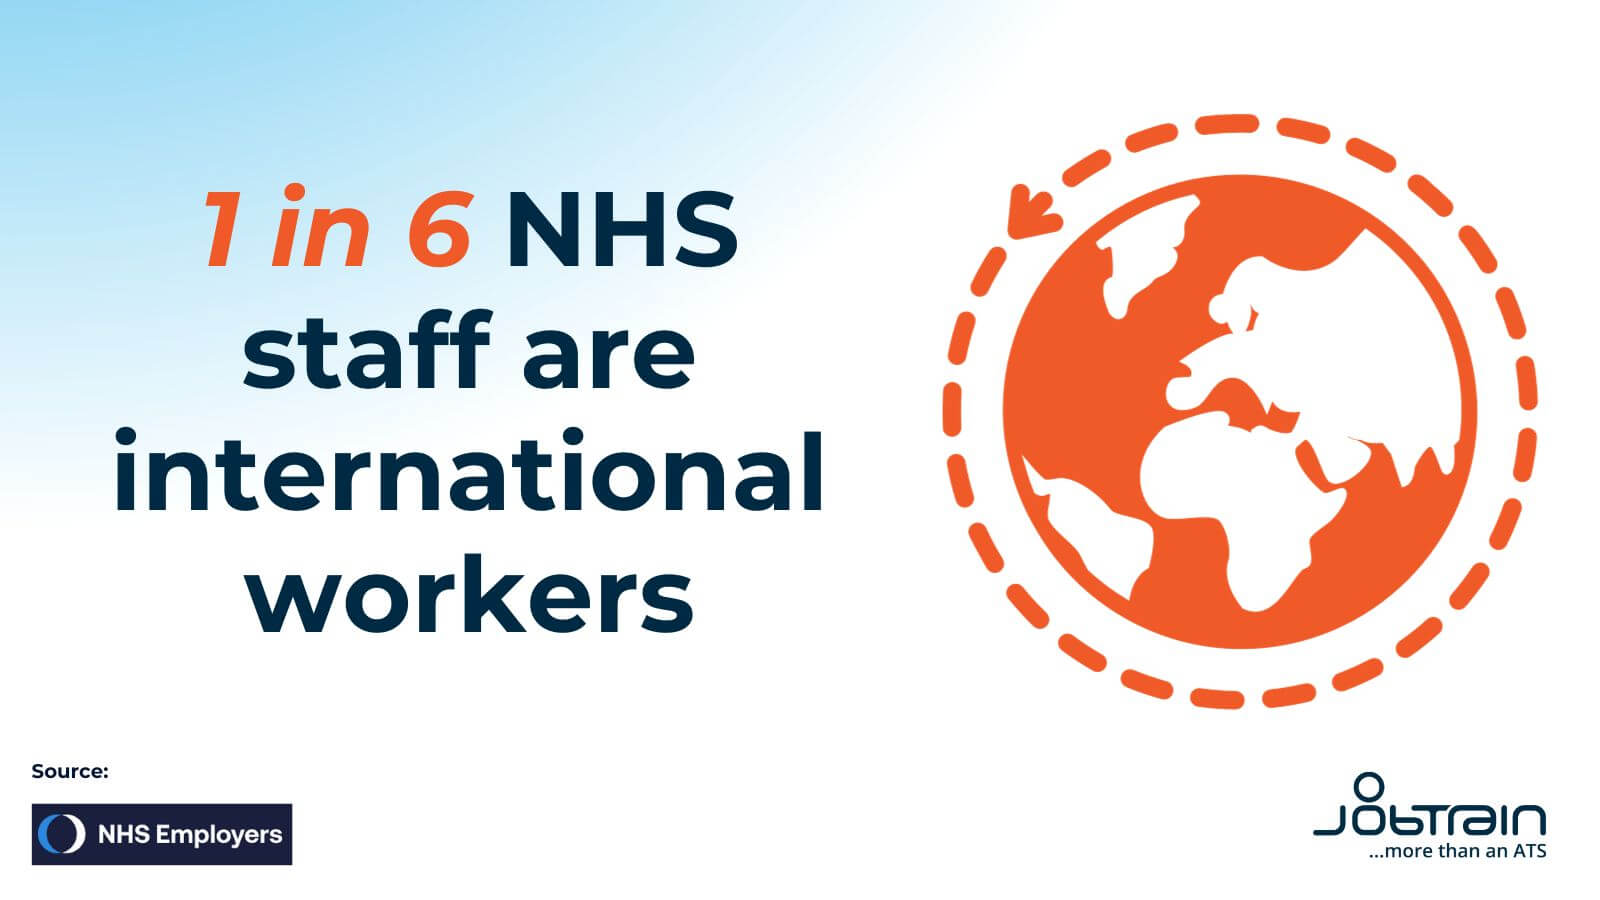 1 in 6 NHS staff are international workers